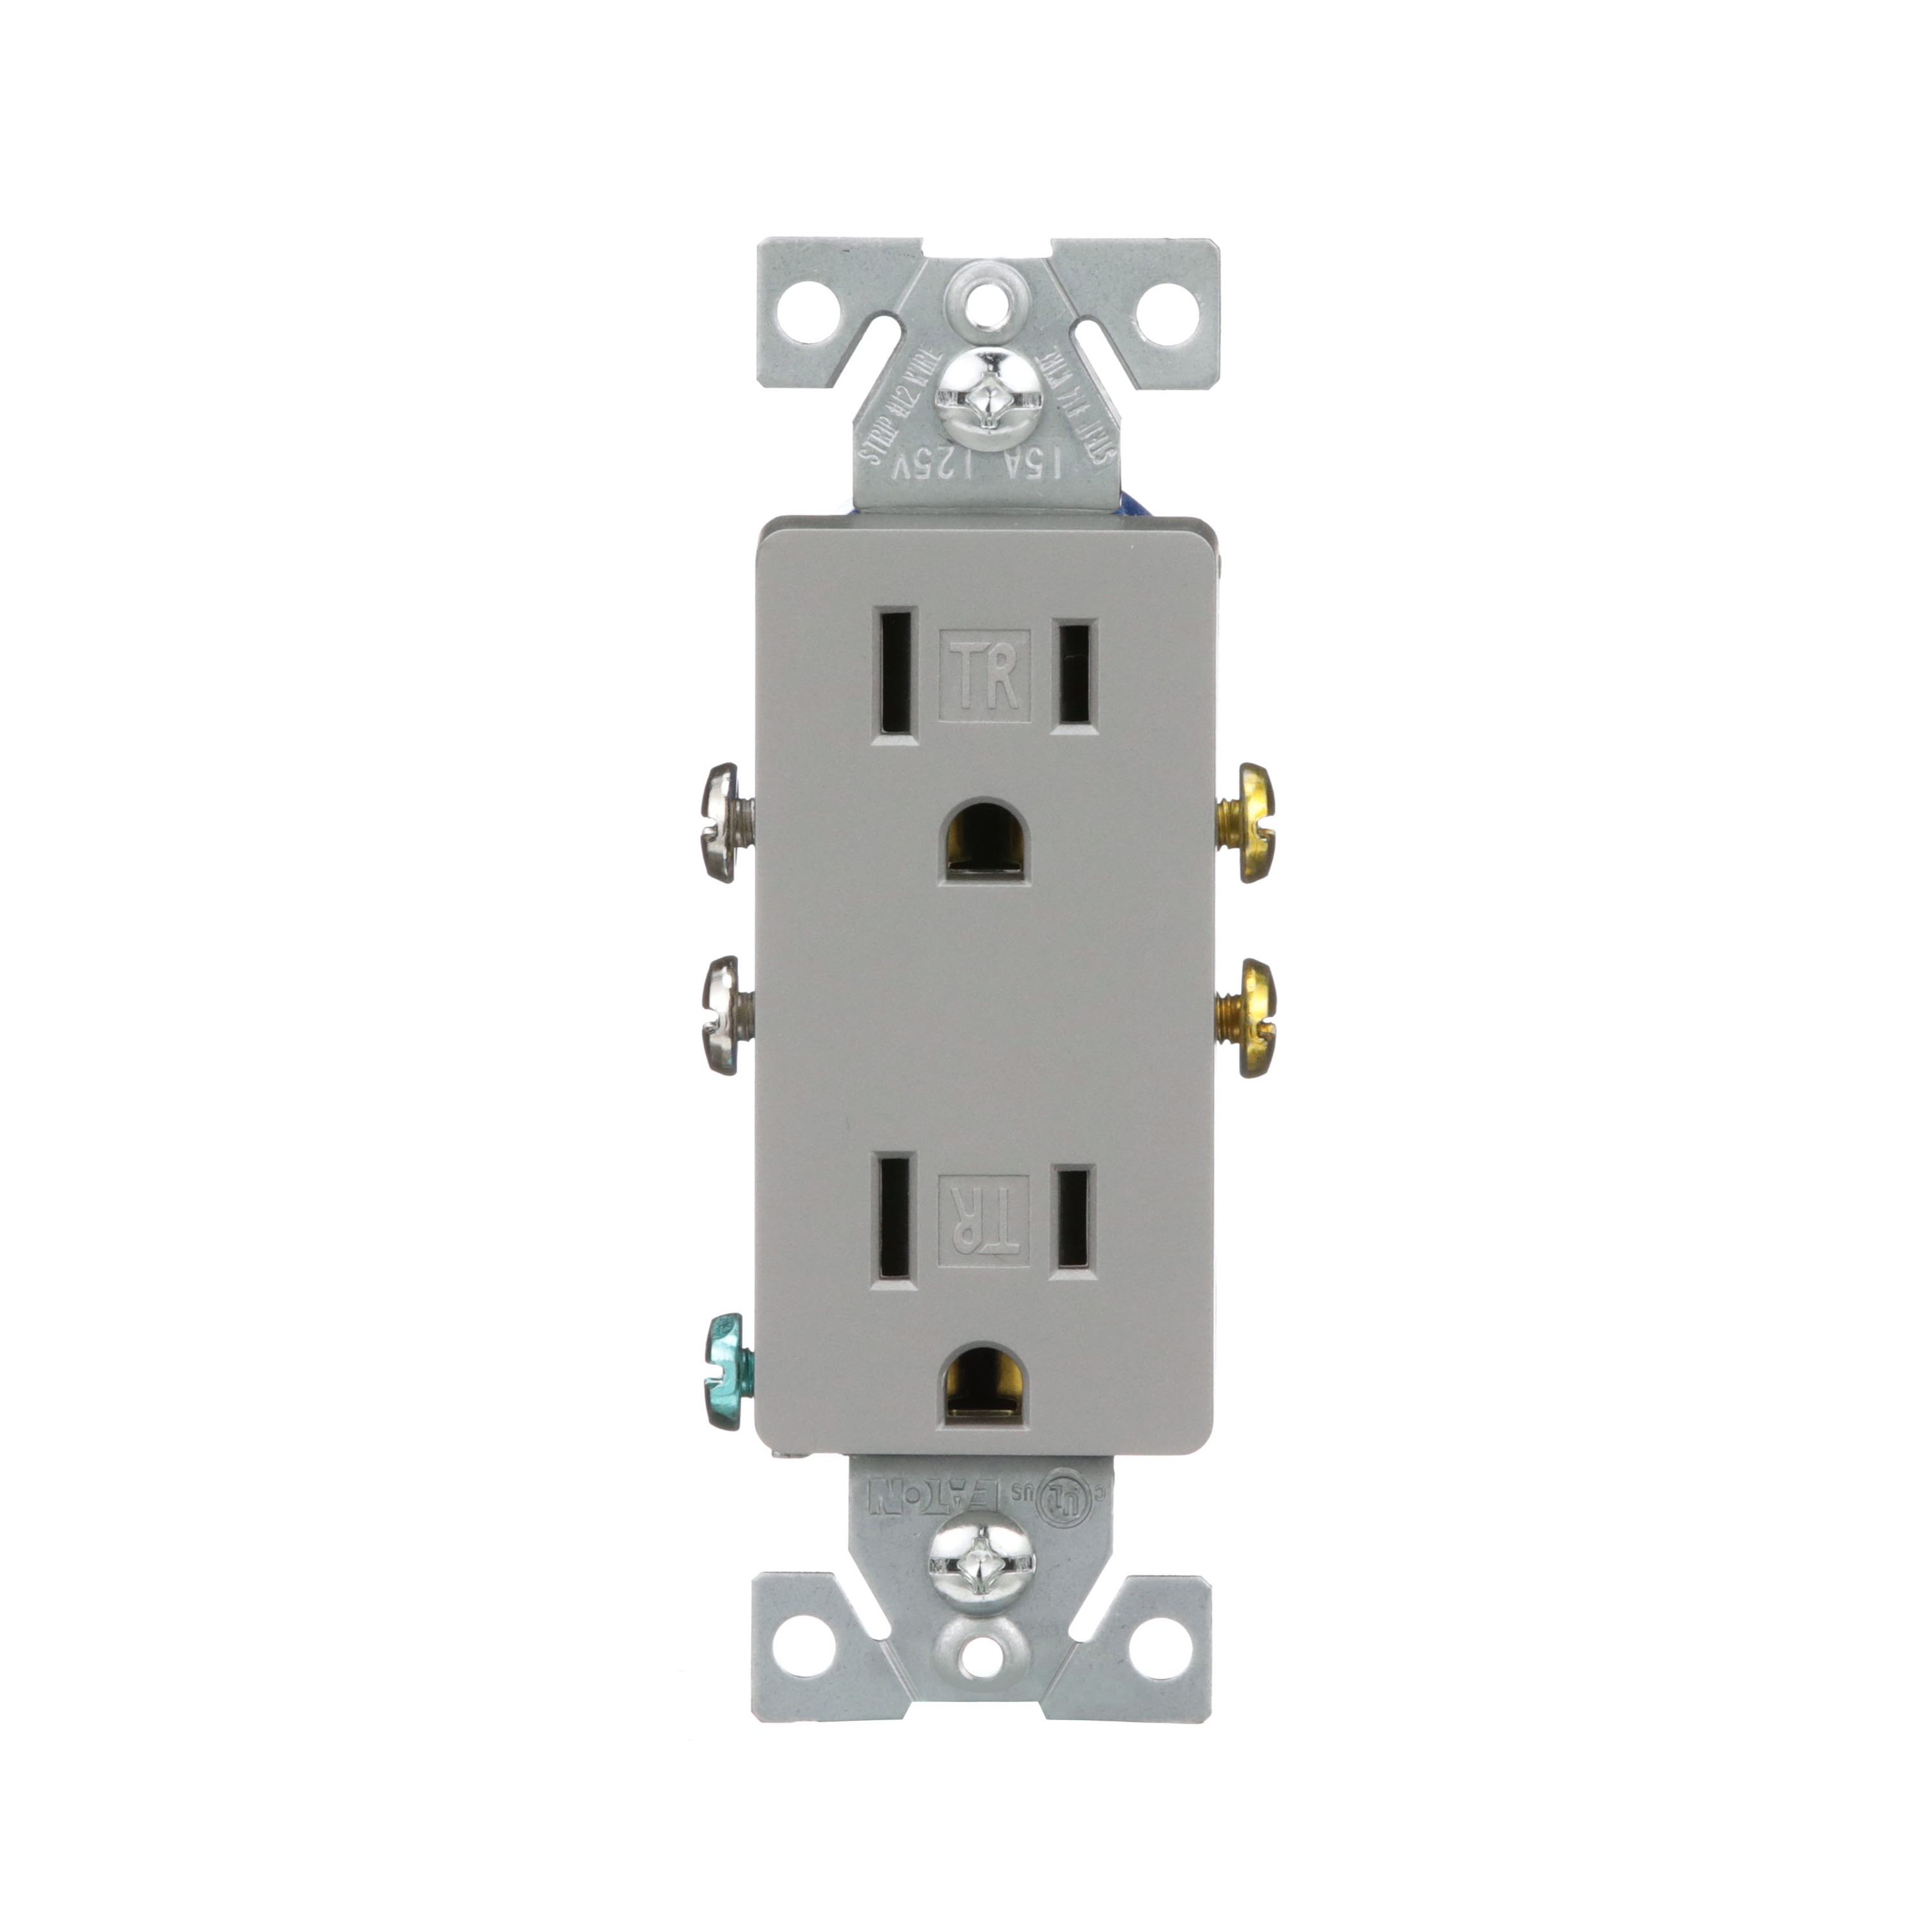 Review - Remote Control Outlet, Foval Wireless Remote Control Electrical  Outlet Switch Plug 